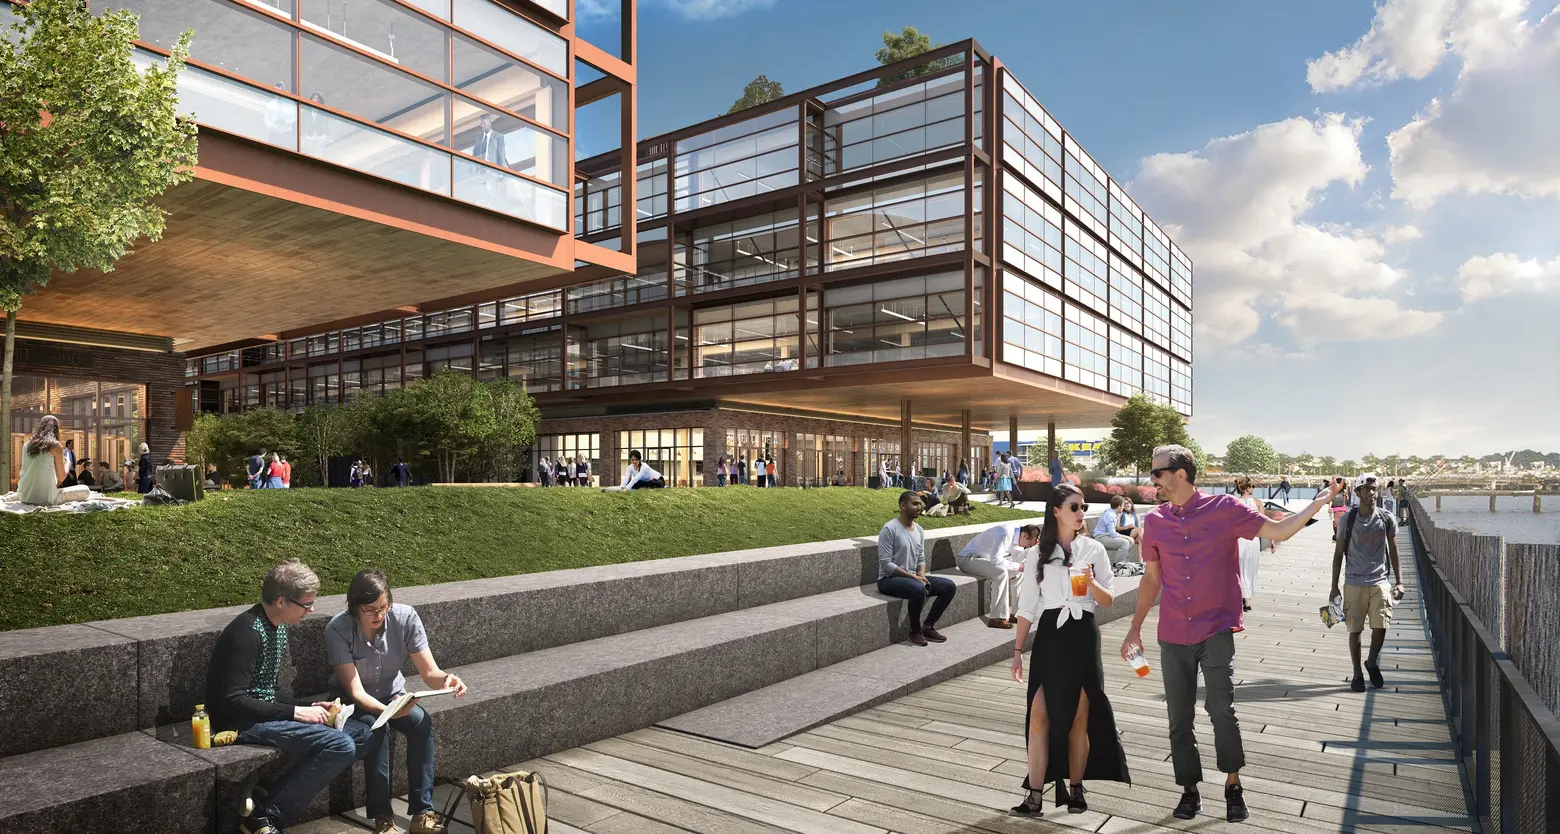 As Red Hook’s Norman Foster office complex plans move forward, local residents want more input